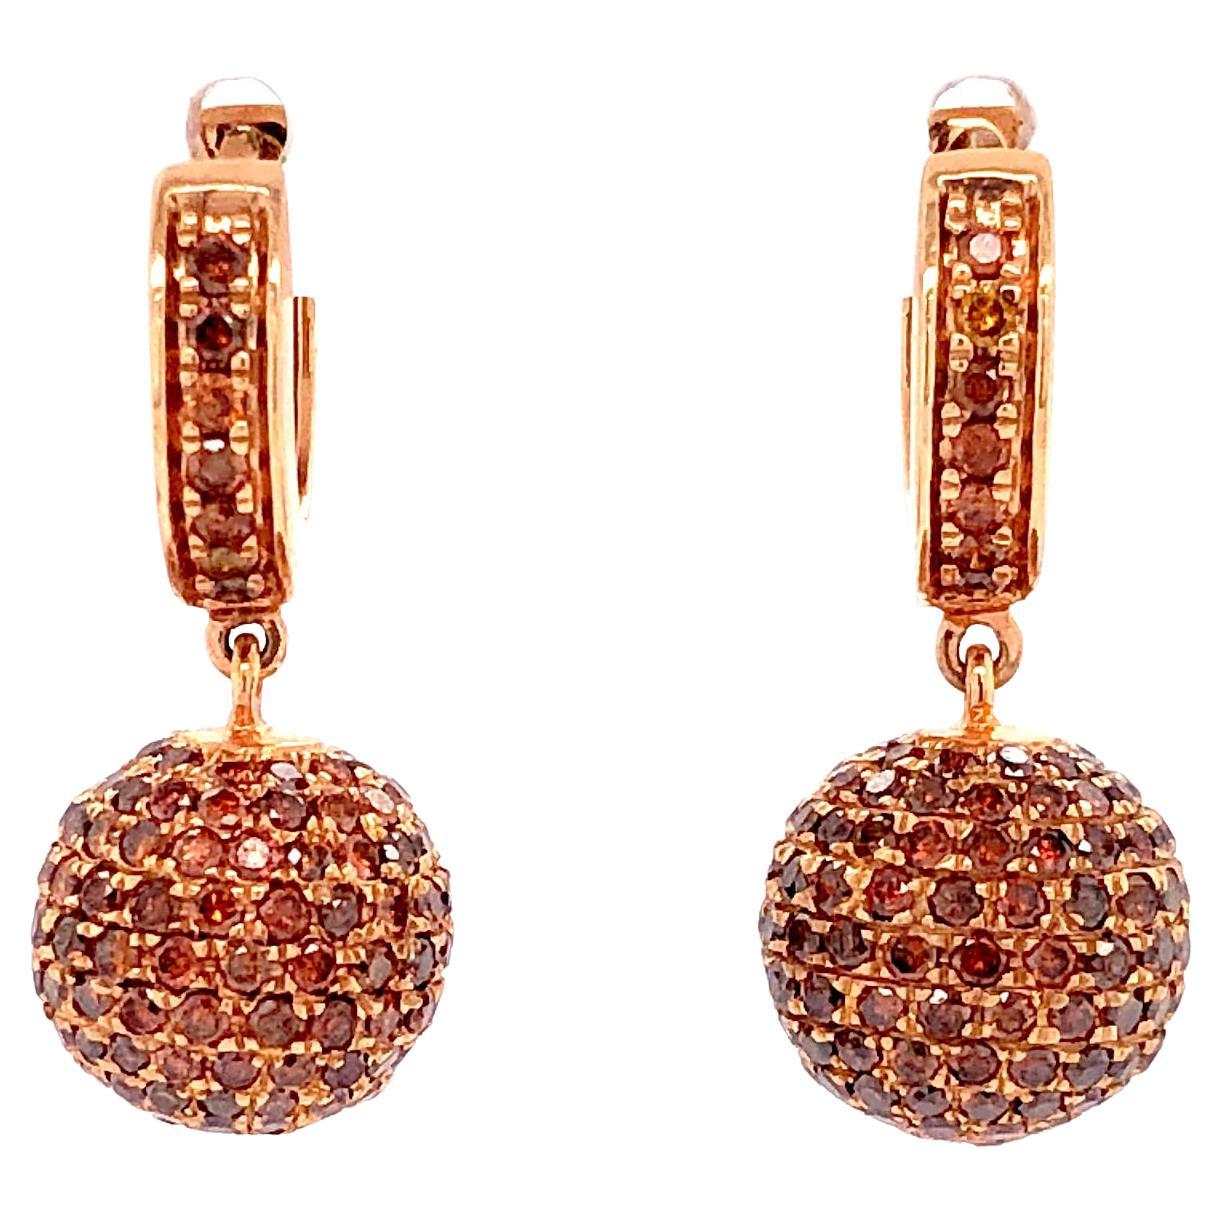 Pave Brown Diamond Ball Earrings Made in 18k Rose Gold